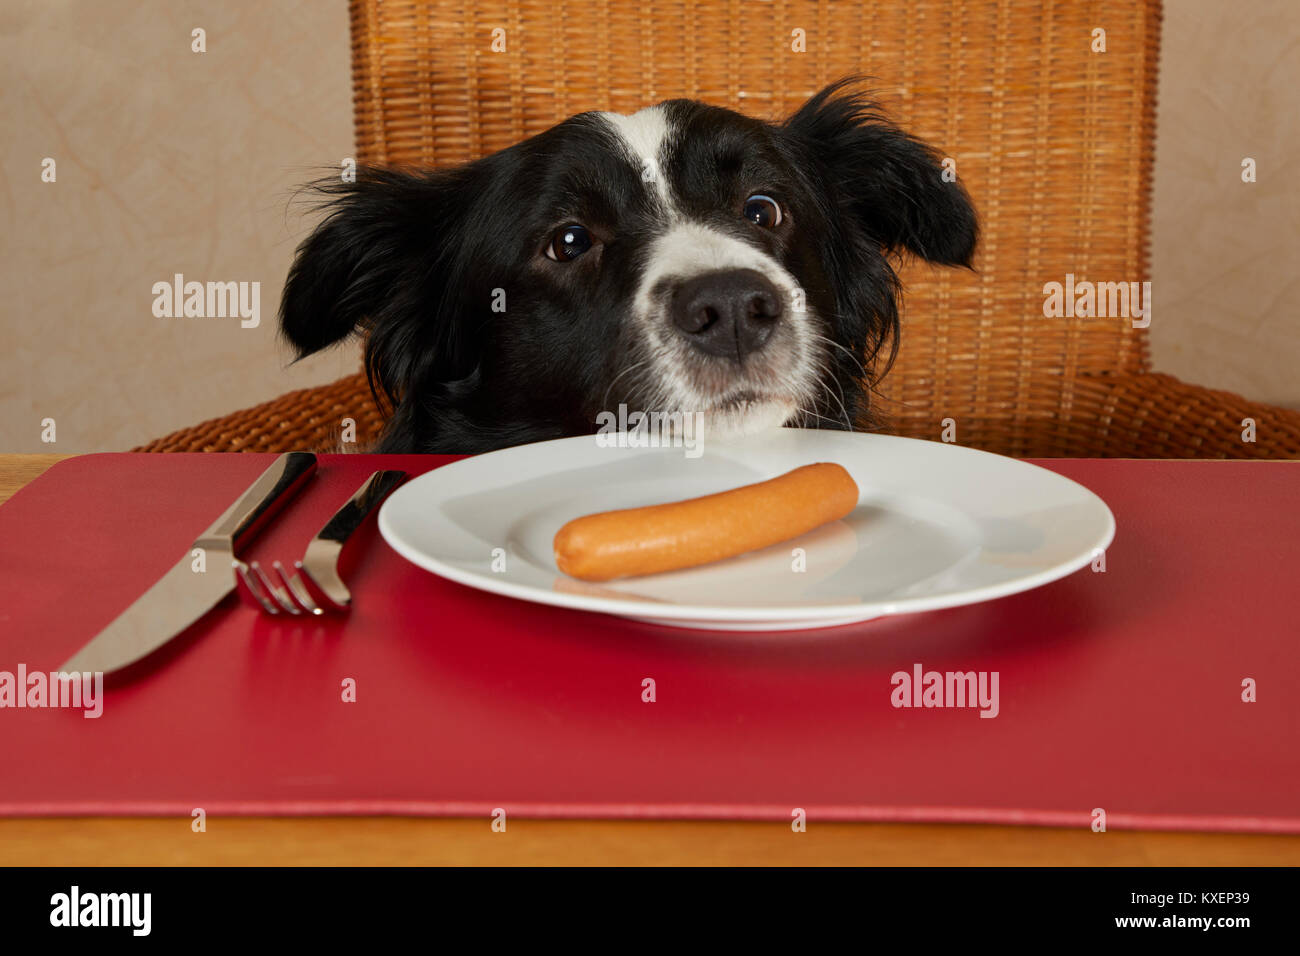 Border Collie looks at the table with sausages on the plate Stock Photo